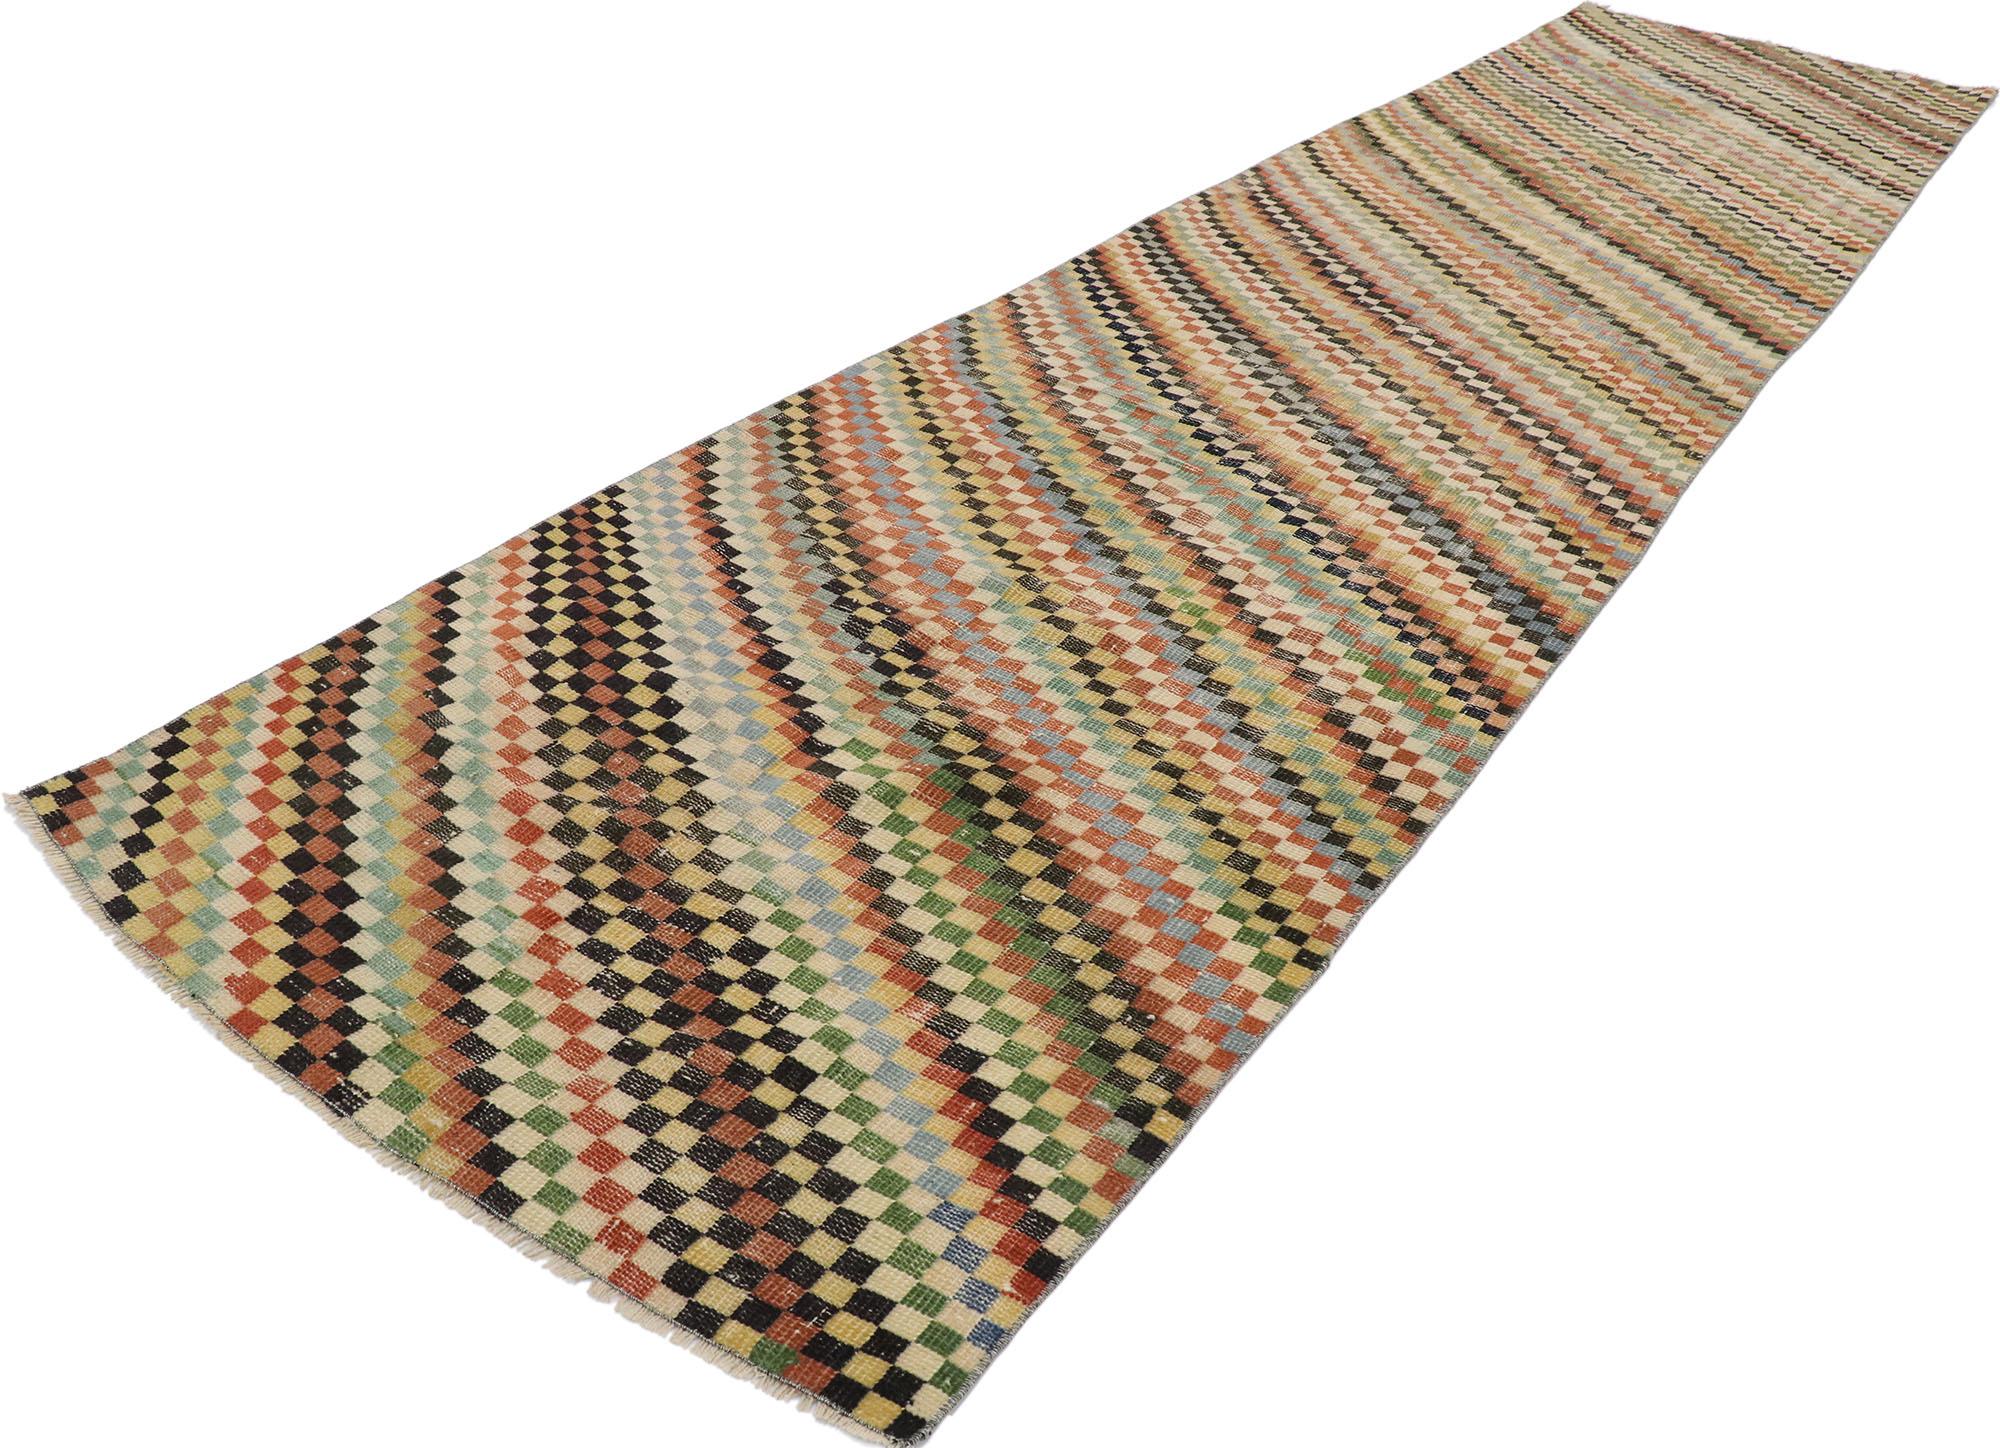 53335, Distressed Vintage Turkish Sivas Runner with Rustic Cubist Style. This hand knotted wool distressed vintage Turkish Sivas rug features an all-over checkered diagonal stripe pattern comprised of rows of multi-colored diamonds. Each row of